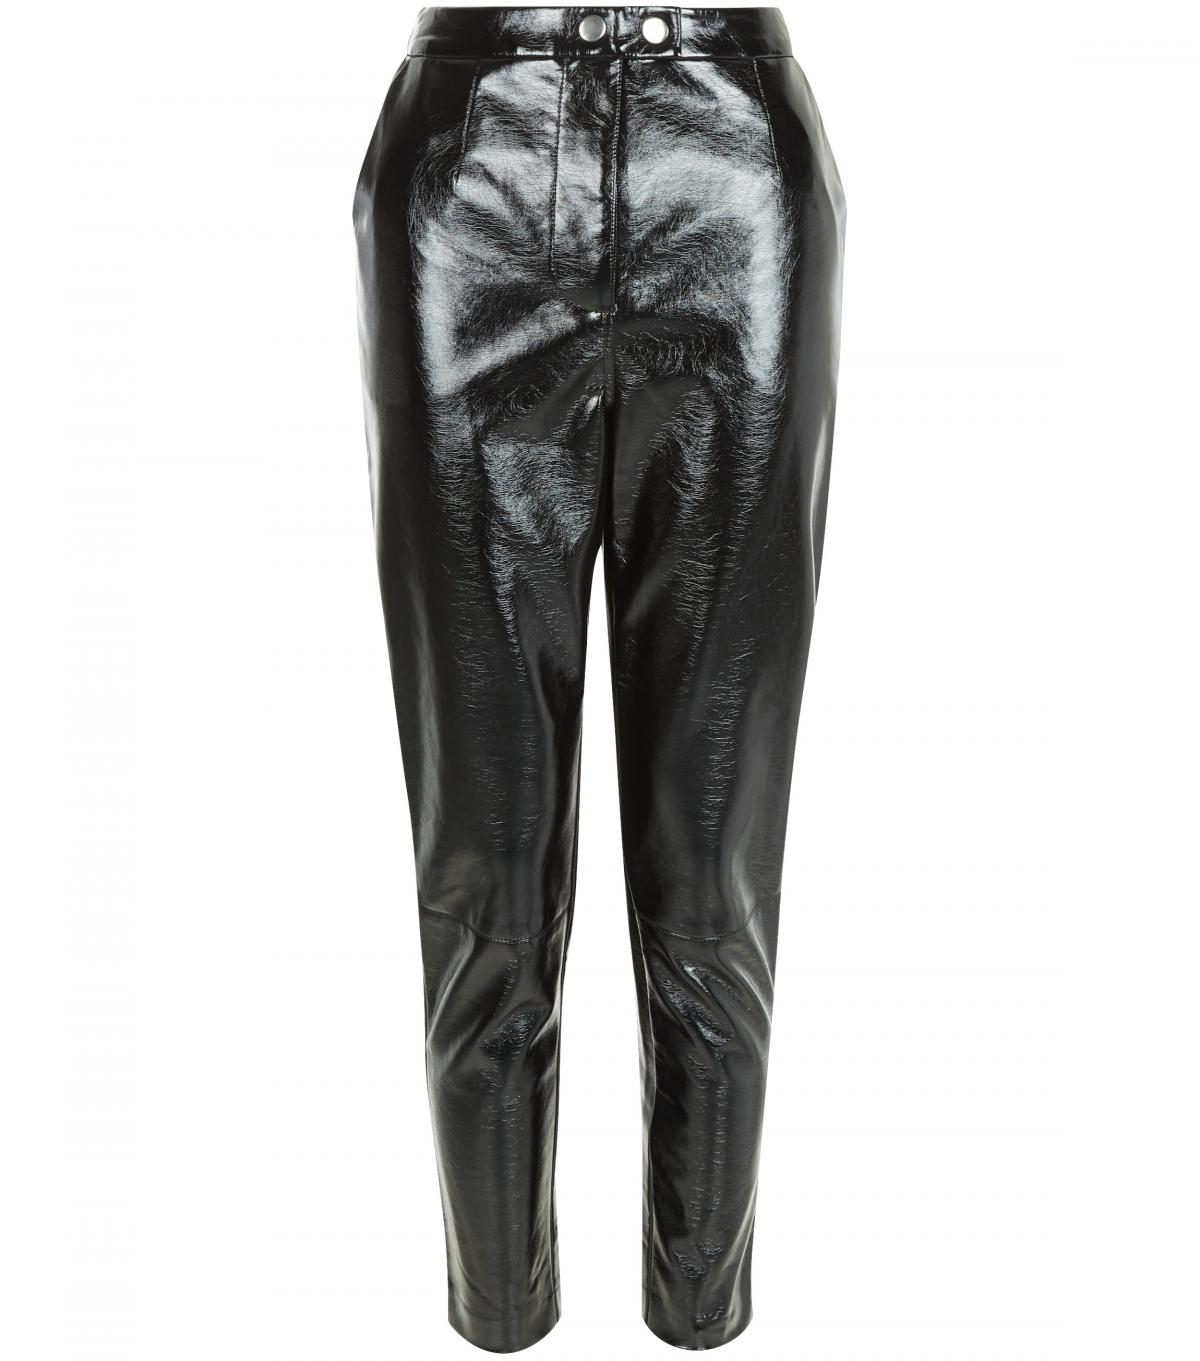 New Look, Black Patent Leather Trousers, £24.99